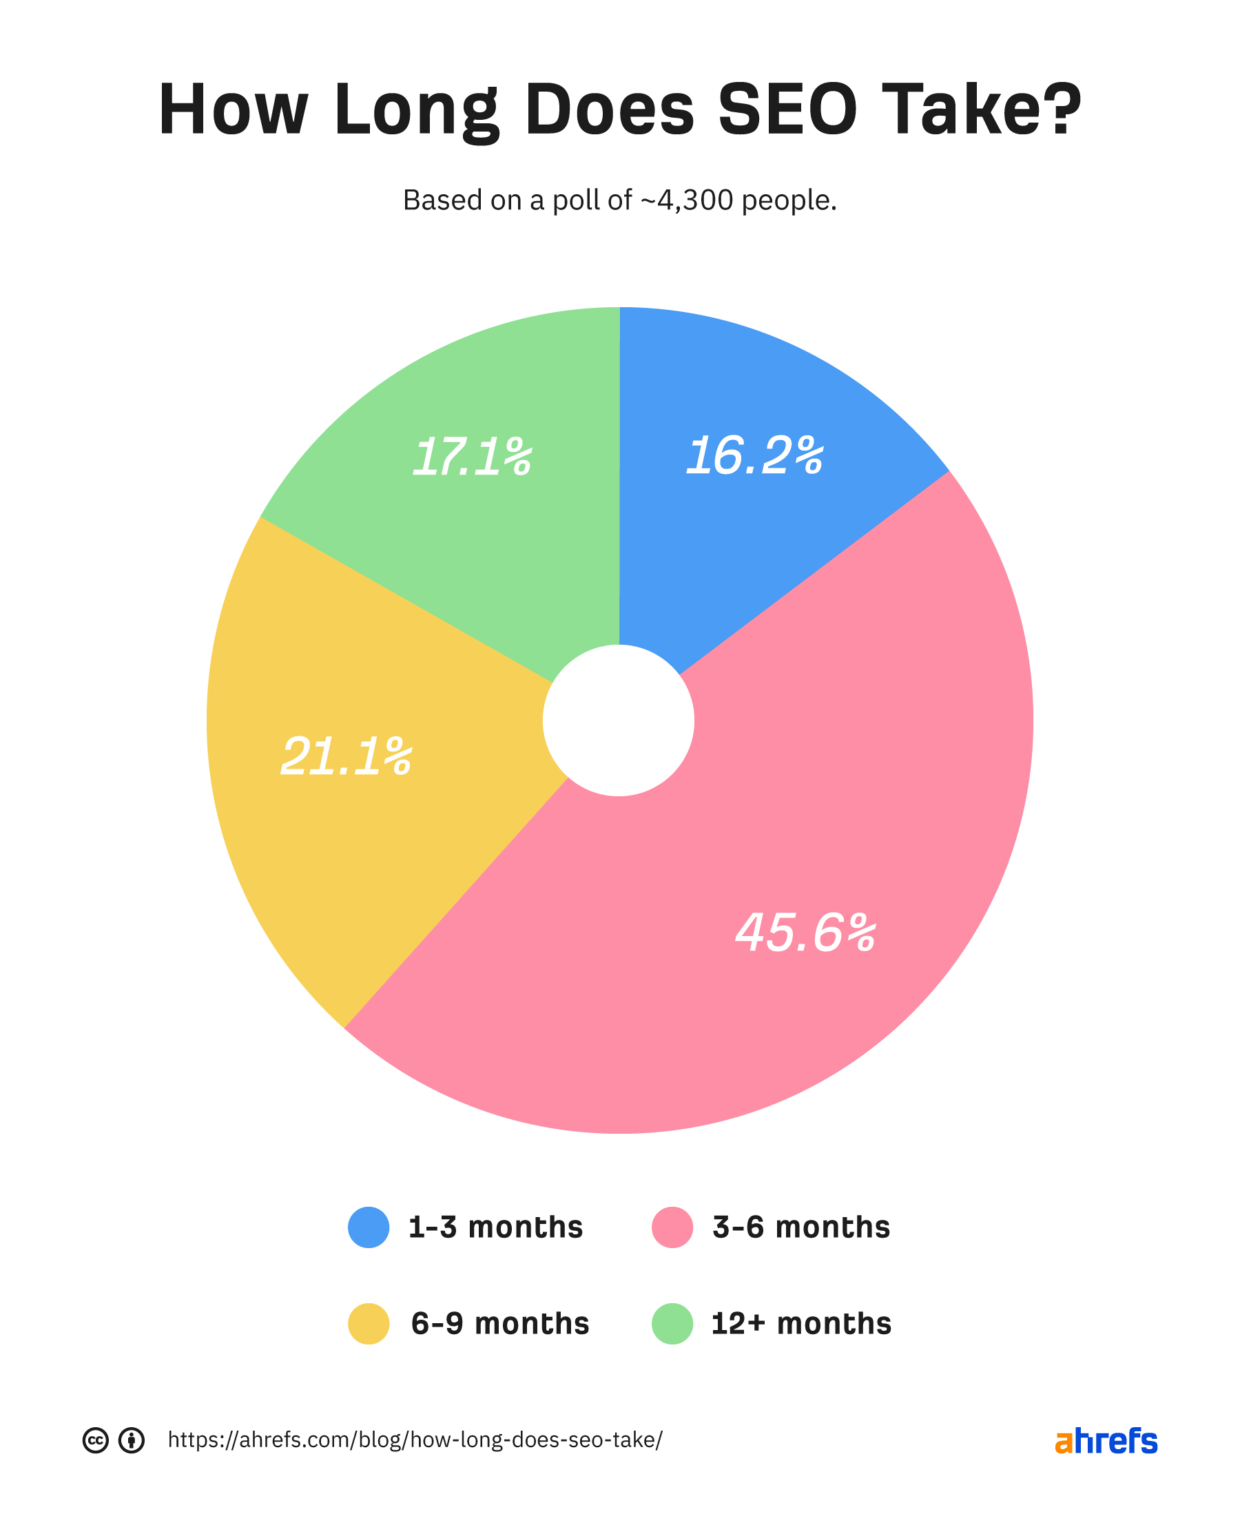 Results of our survey asking ،w long SEO takes
